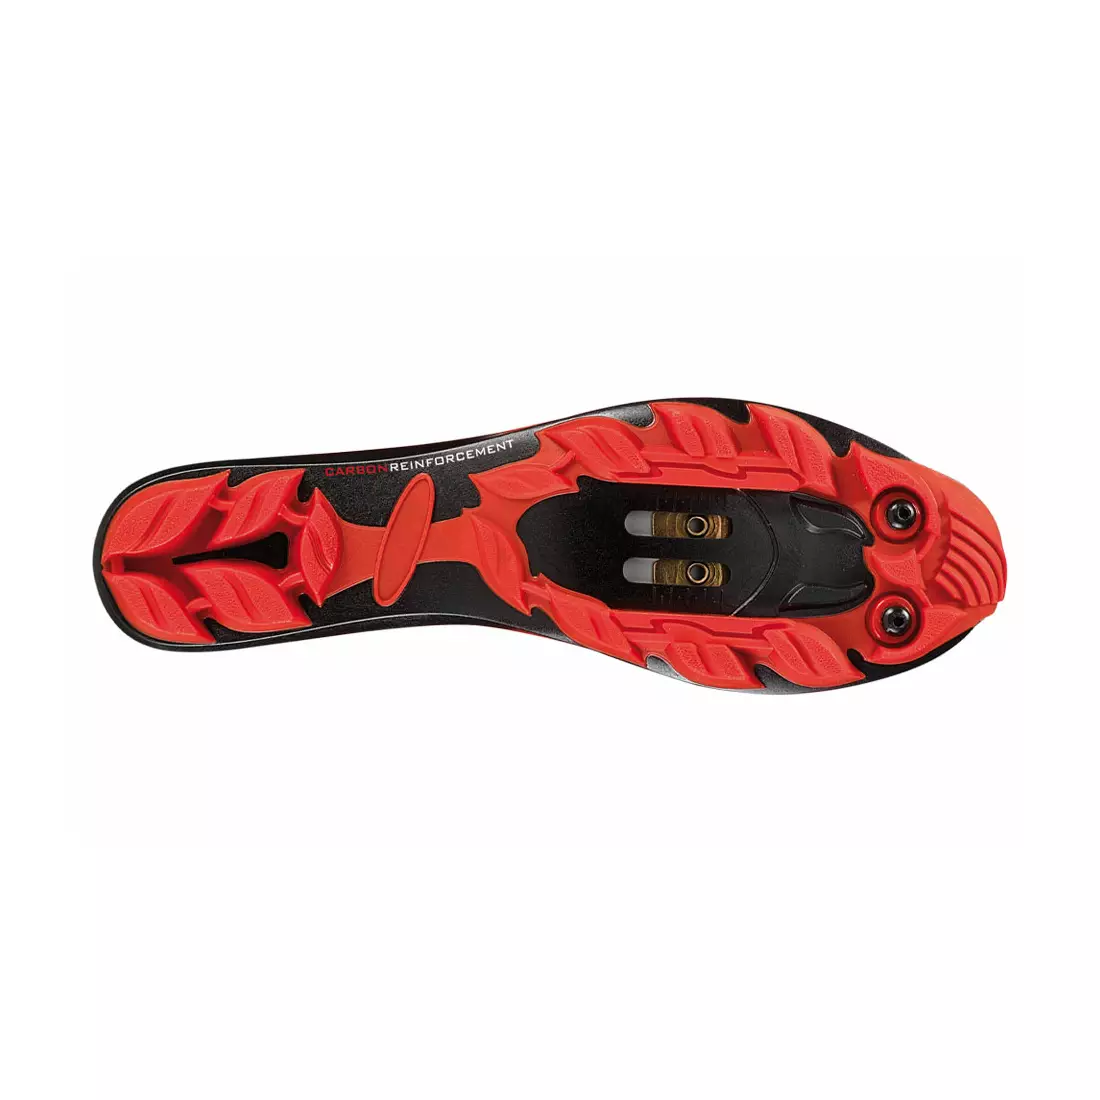 CRONO TRACK - MTB cycling shoes - color: Red